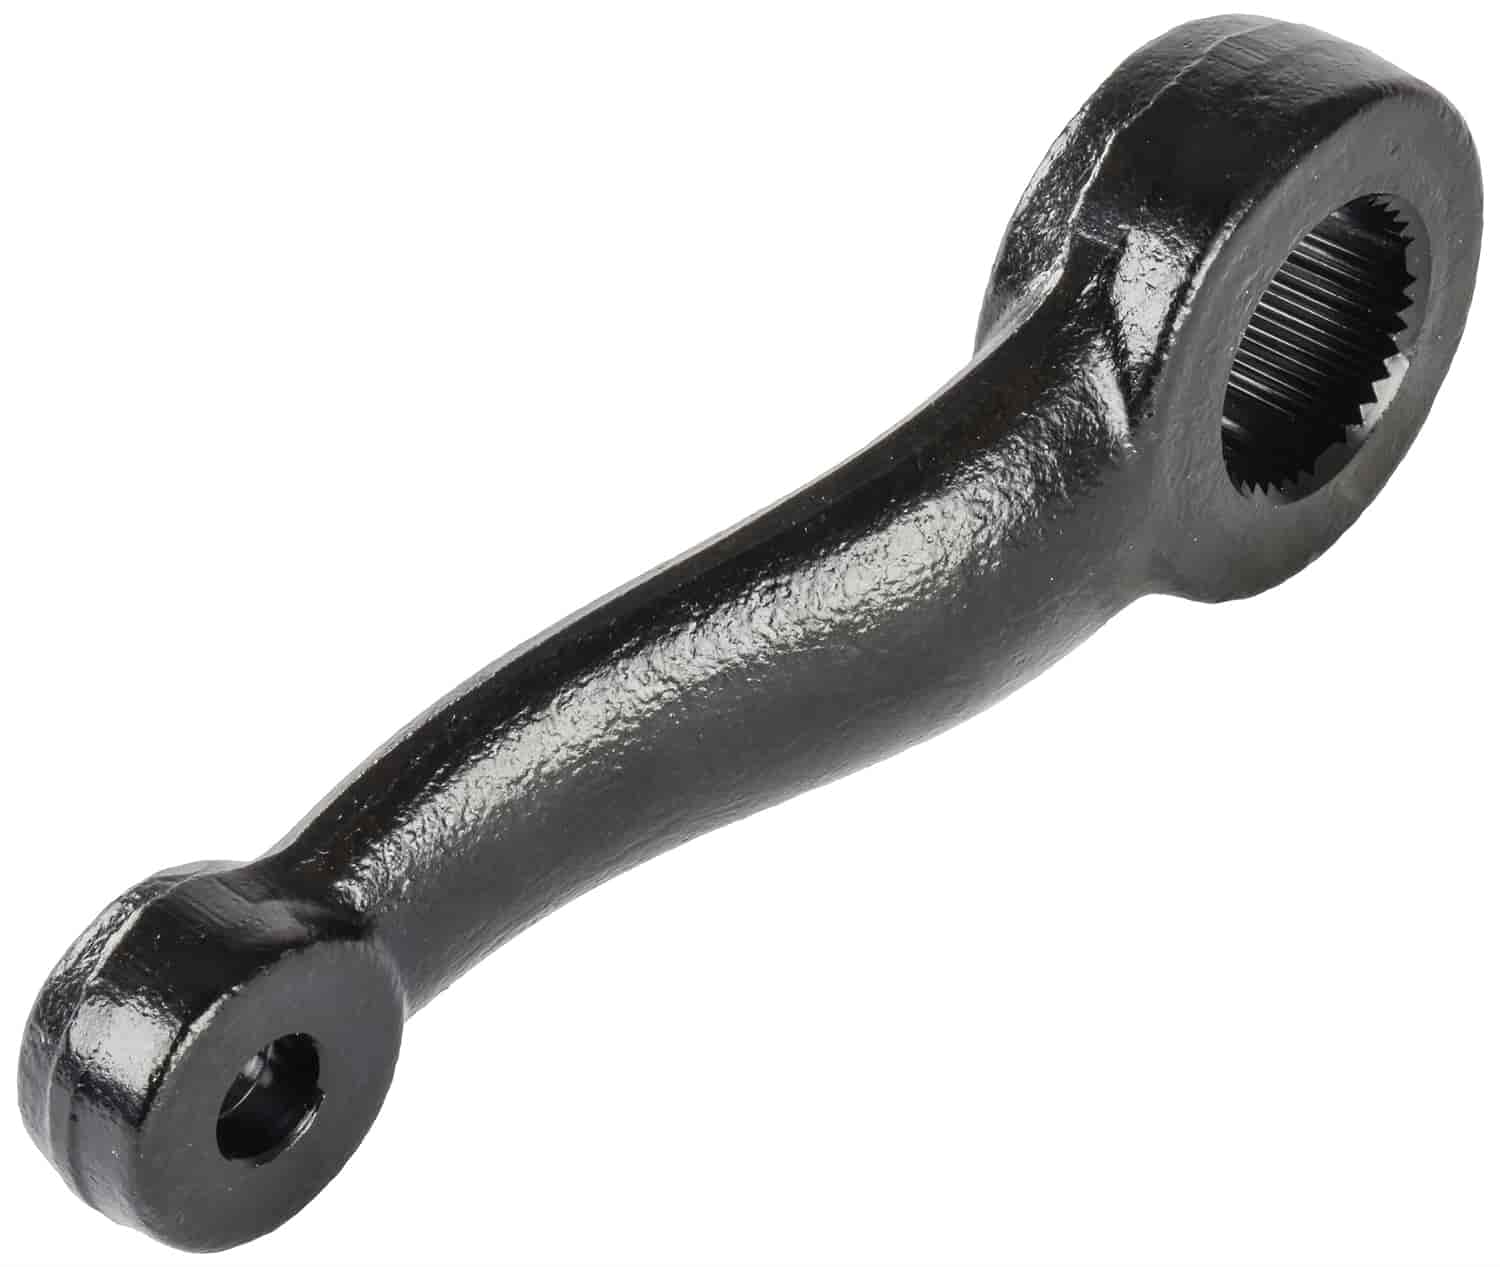 Pitman Arm for 1964-1967 GM A-Body Passenger Cars [Power Steering]